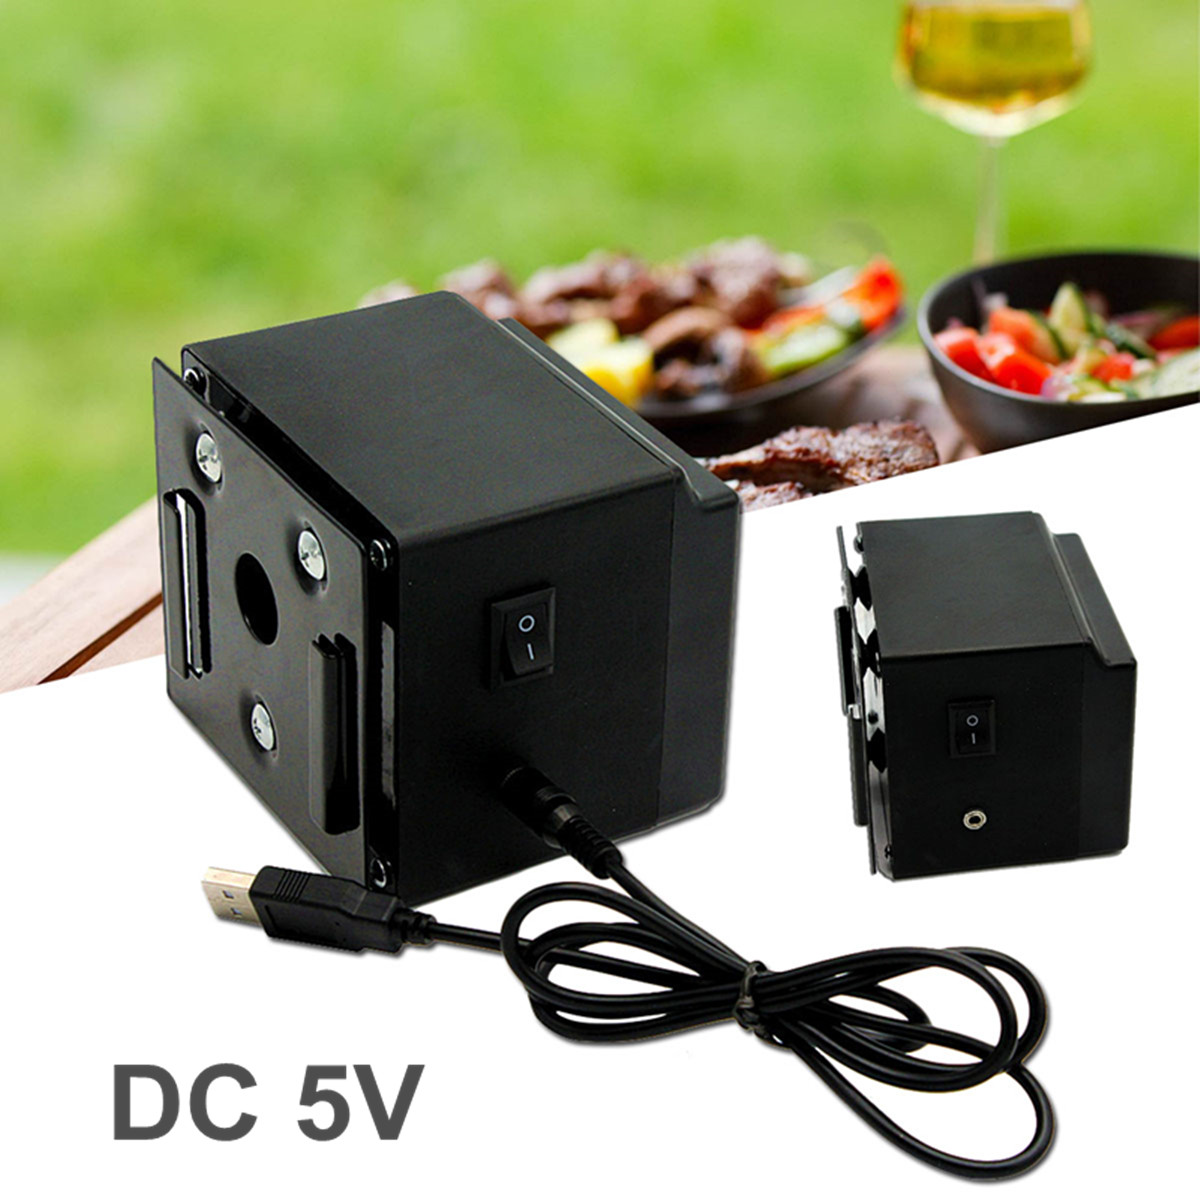 DC-5V-USB-BBQ-Spit-Roast-Rotisserie-Motor-Switch-Outdoor-Barbecue-Tool-Accessories-1423174-1